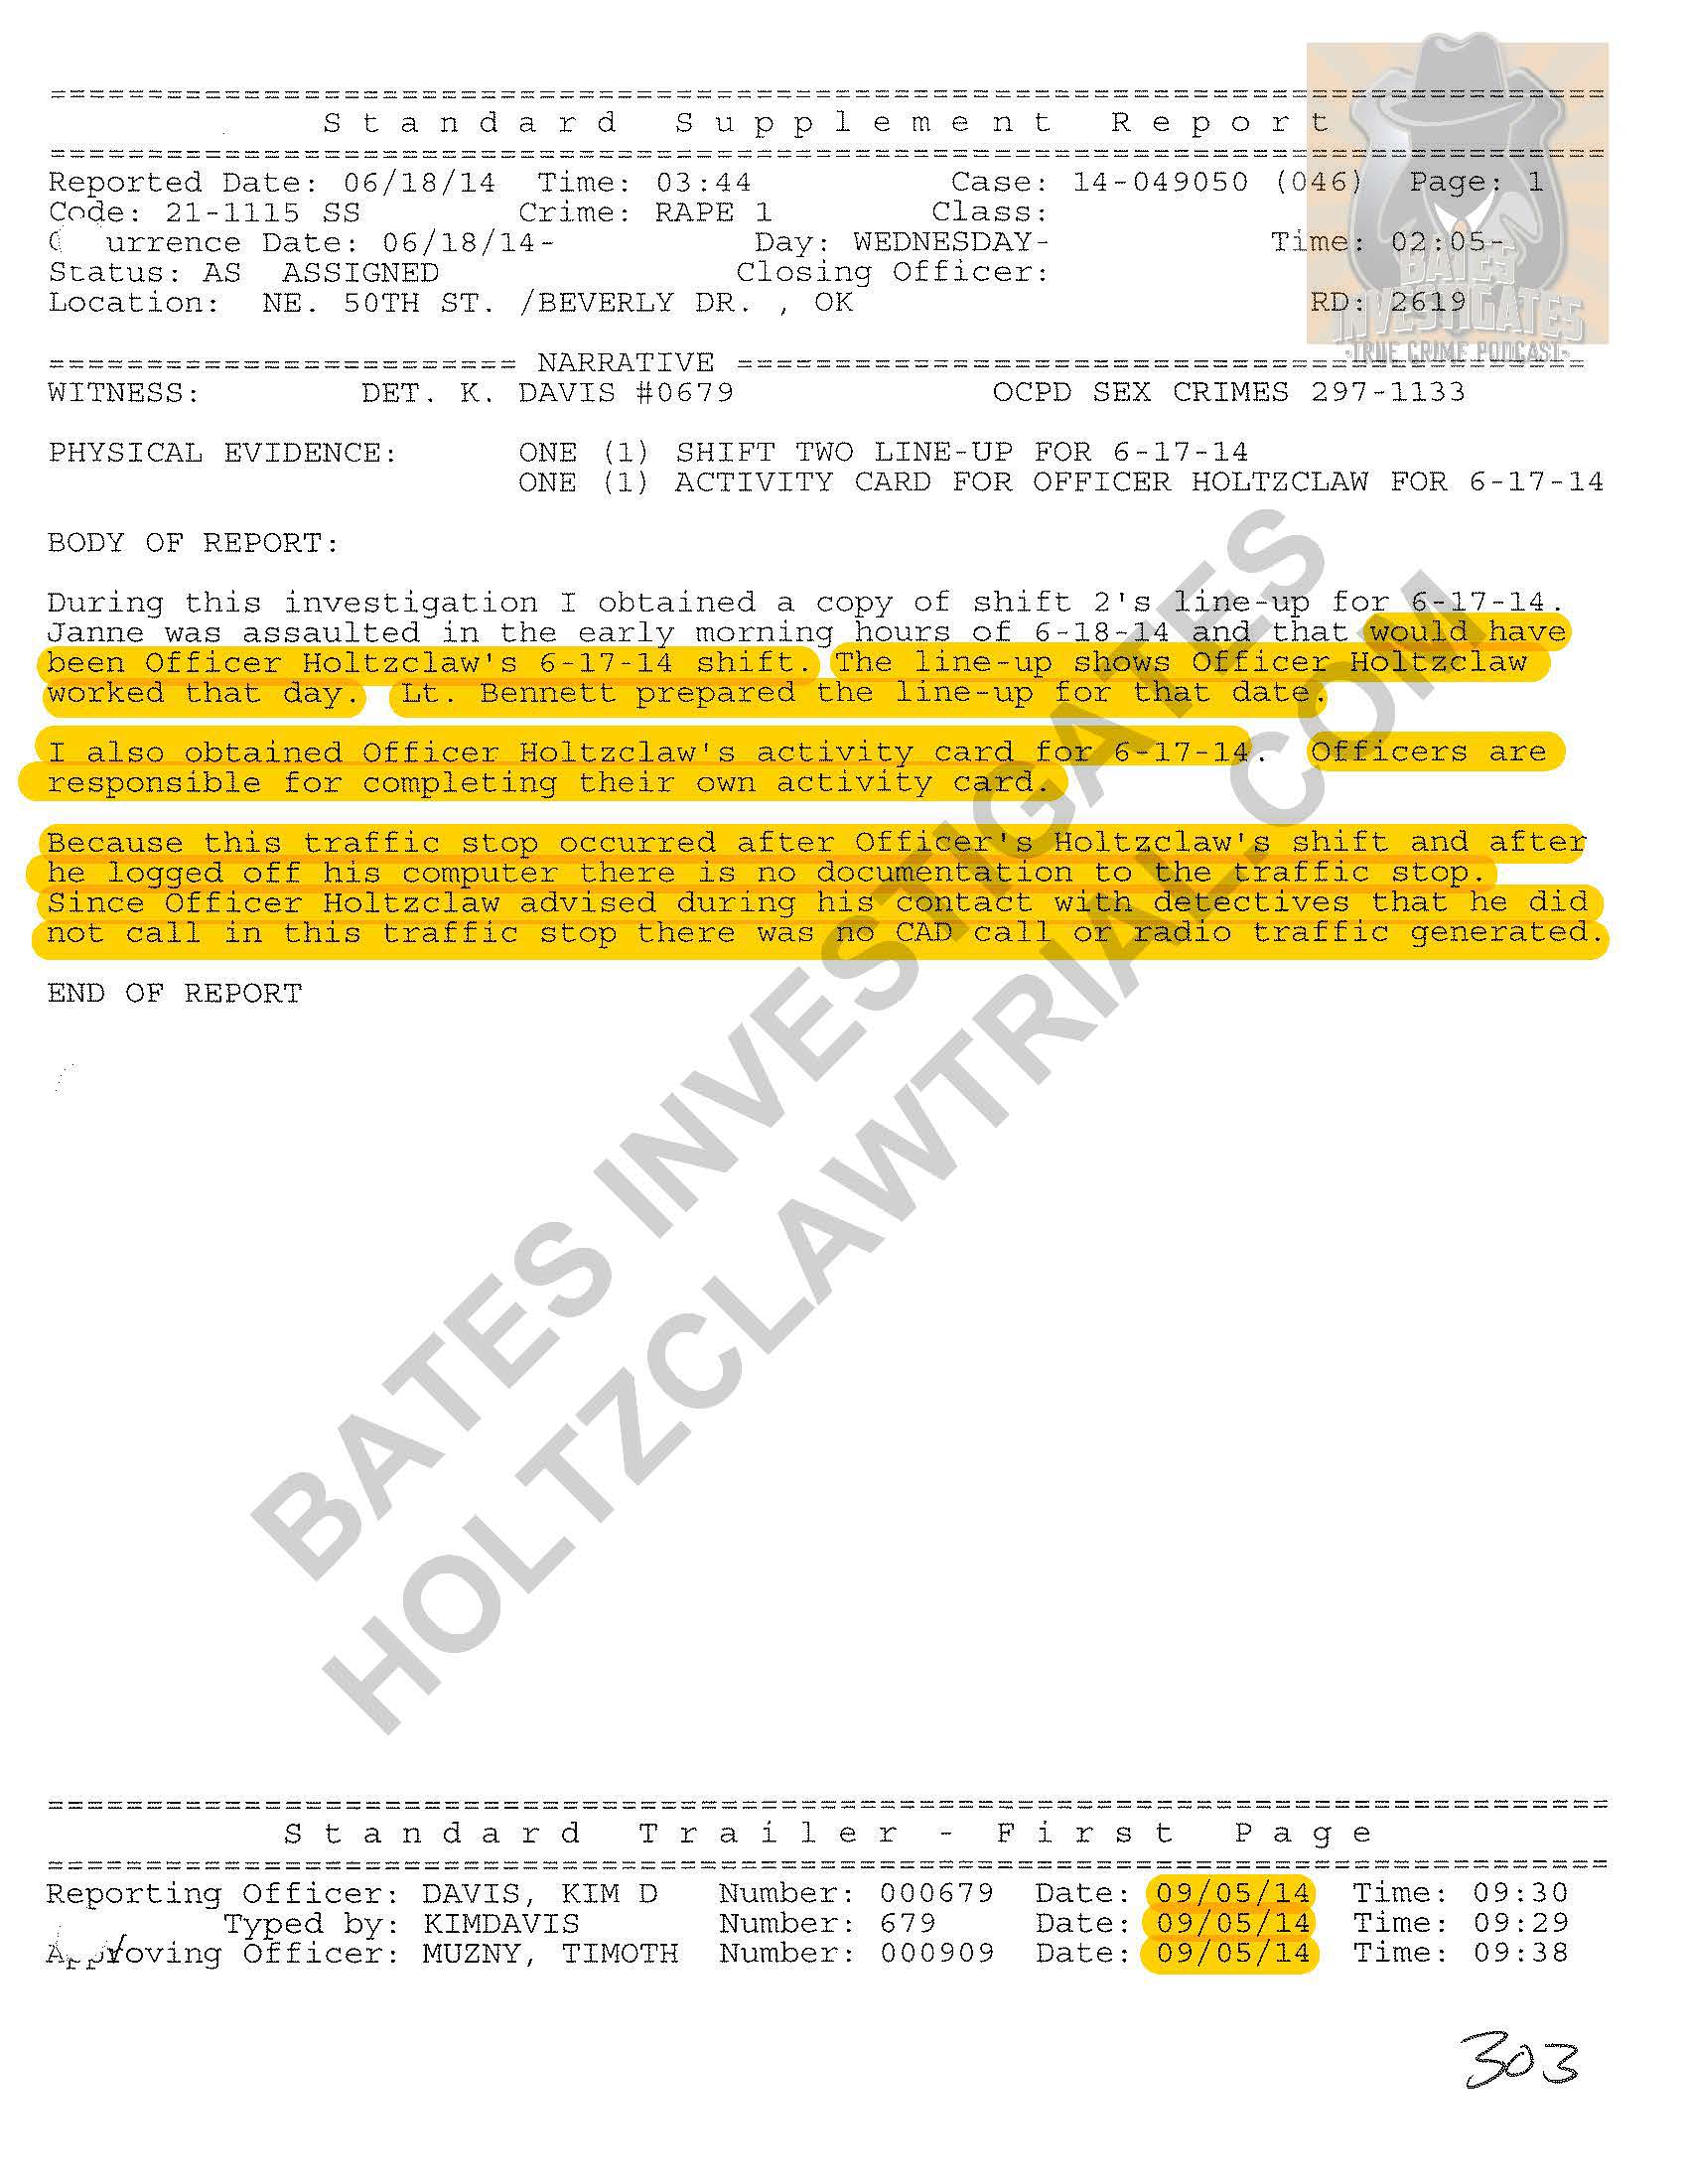 Holtzclaw - Ep02 - Police Reports Watermarked_Page_33.jpg